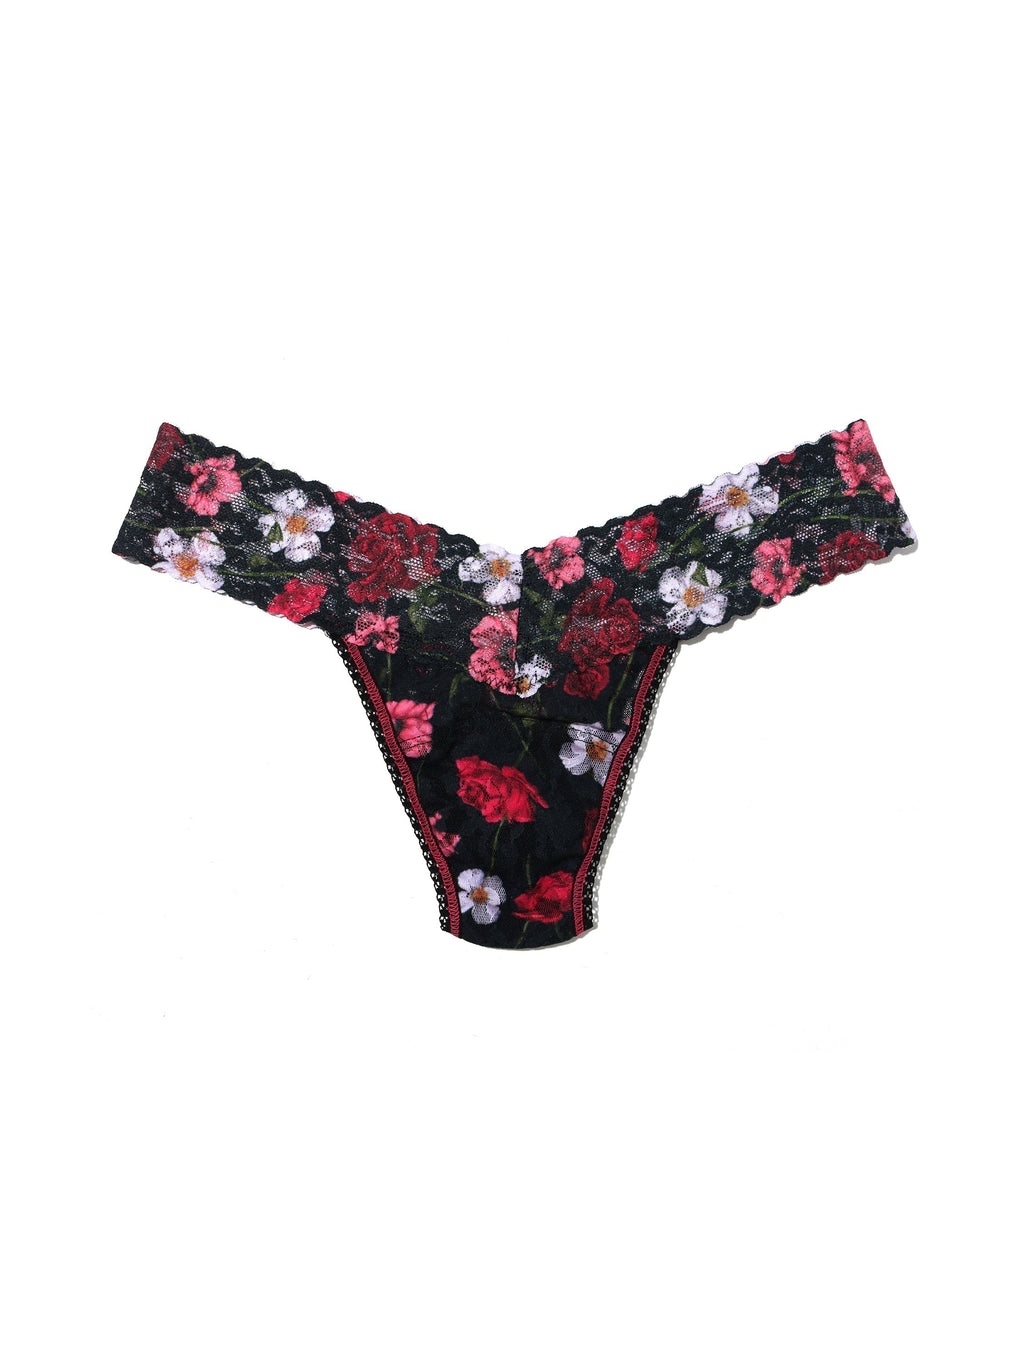 Printed Signature Lace Low Rise Thong Am I Dreaming Sale | Hanky Panky